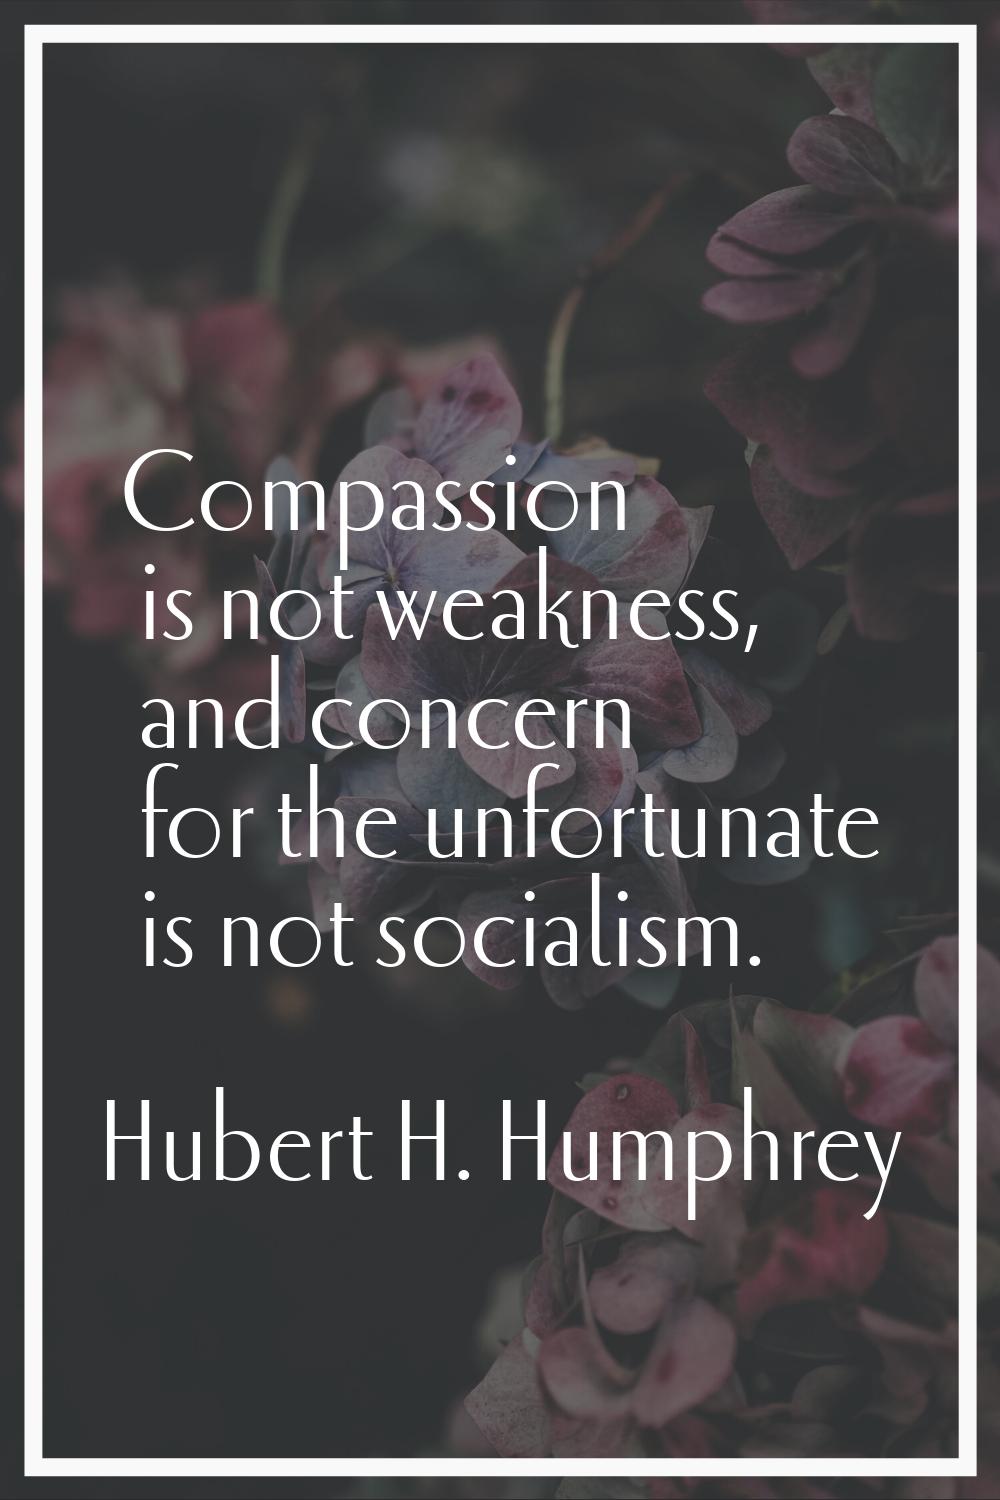 Compassion is not weakness, and concern for the unfortunate is not socialism.